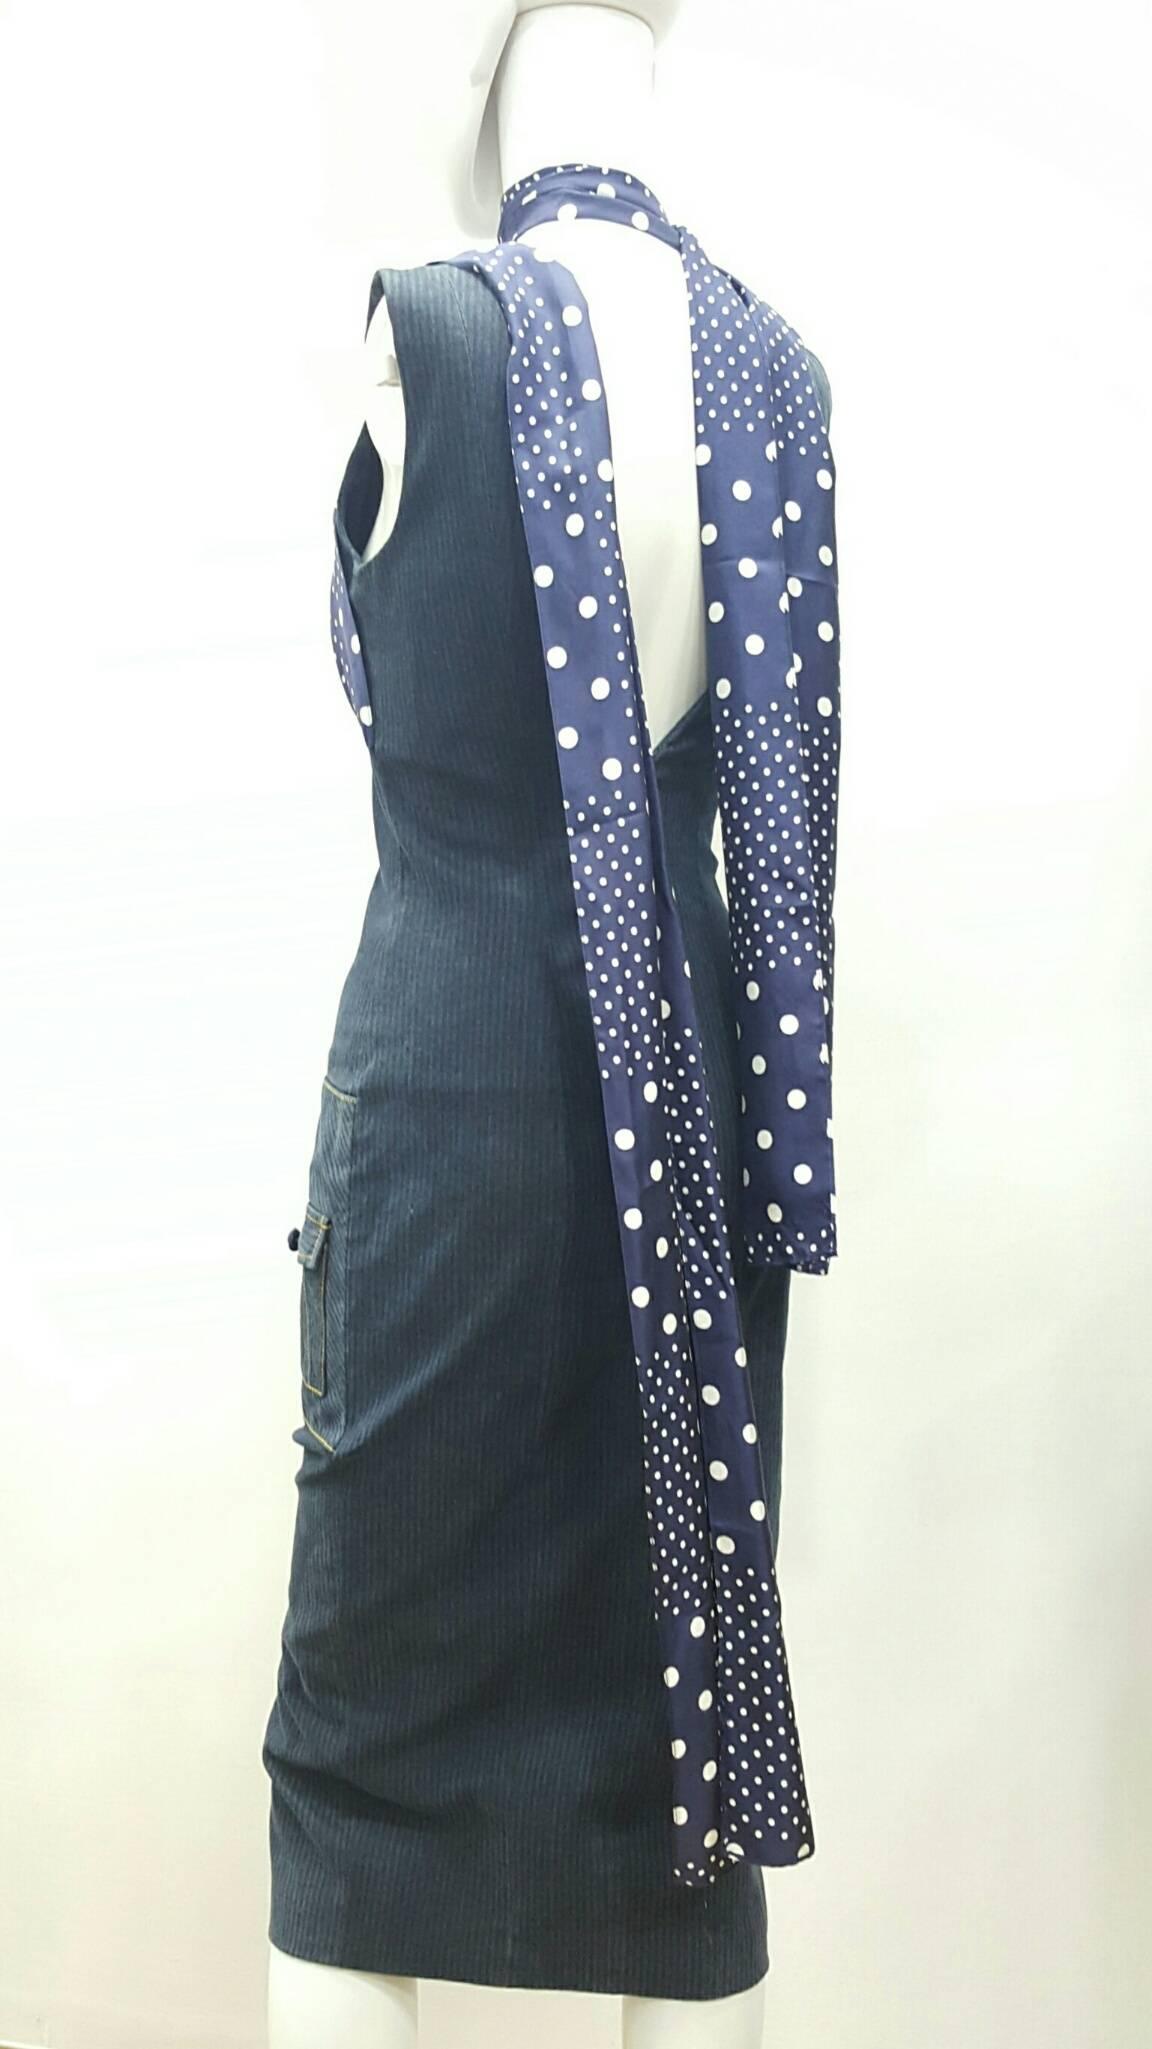 2005 denim and polkadots John Galliano dress
Totally made in France
France size range: 36
ITalian size range 40
Composition:
98% cotton 2% nycra
Other textile: 100% silk
Lining: 94% silk 6% elastane